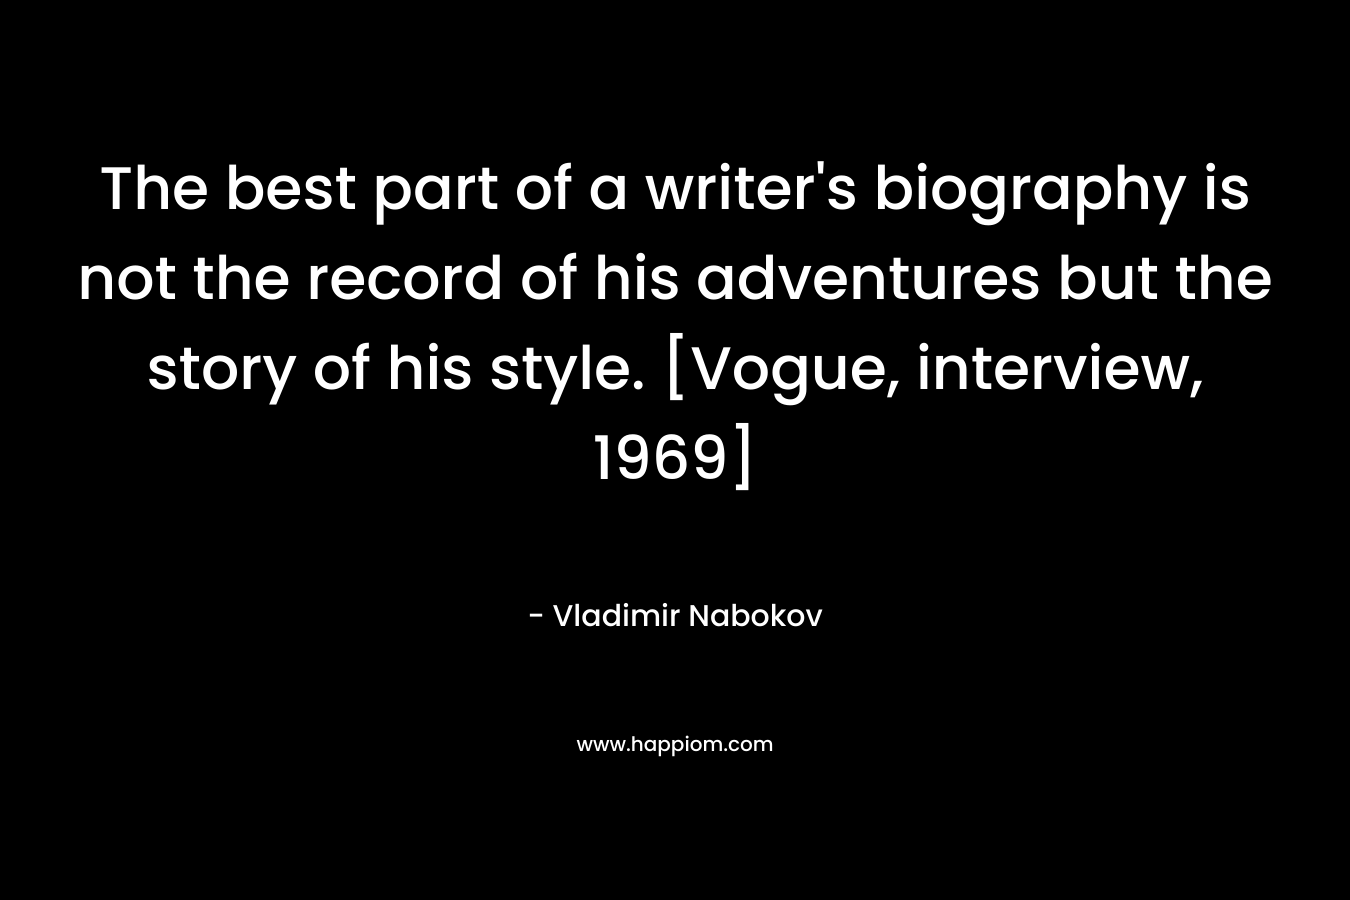 The best part of a writer's biography is not the record of his adventures but the story of his style. [Vogue, interview, 1969]